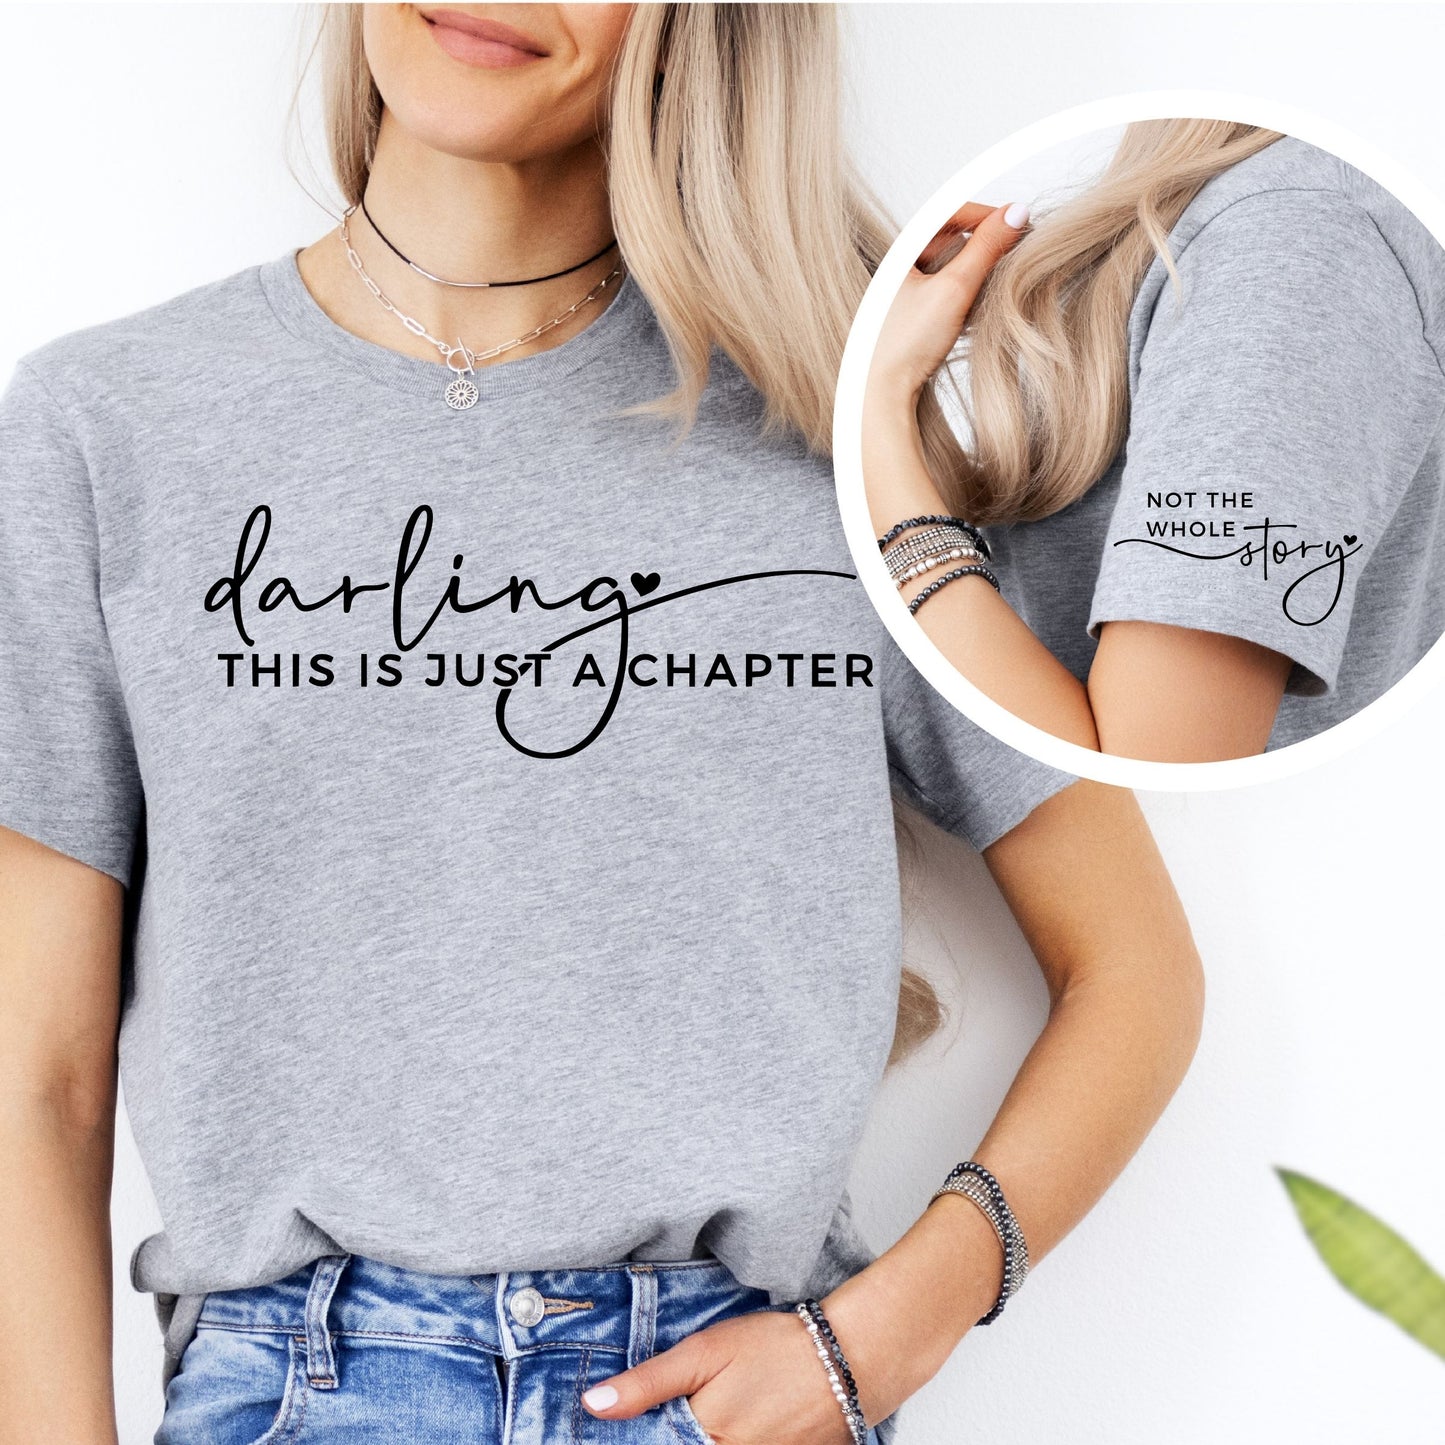 Darling This Is Just A Chapter T-Shirt - Mardonyx T-Shirt XS / Athletic Heather